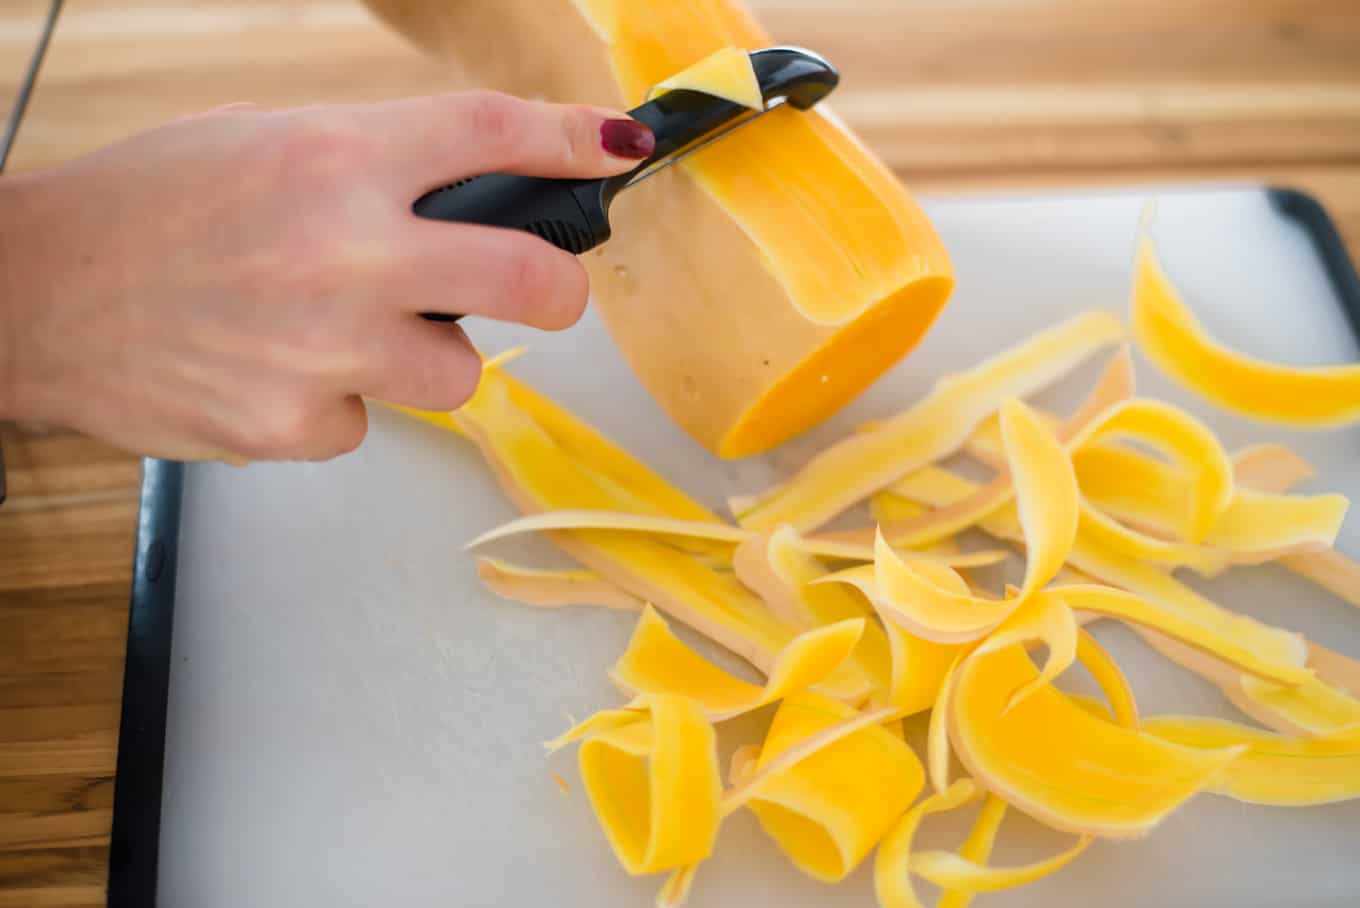 A hand holding a vegetable peeler, peeling a butternut squash on a cutting board.